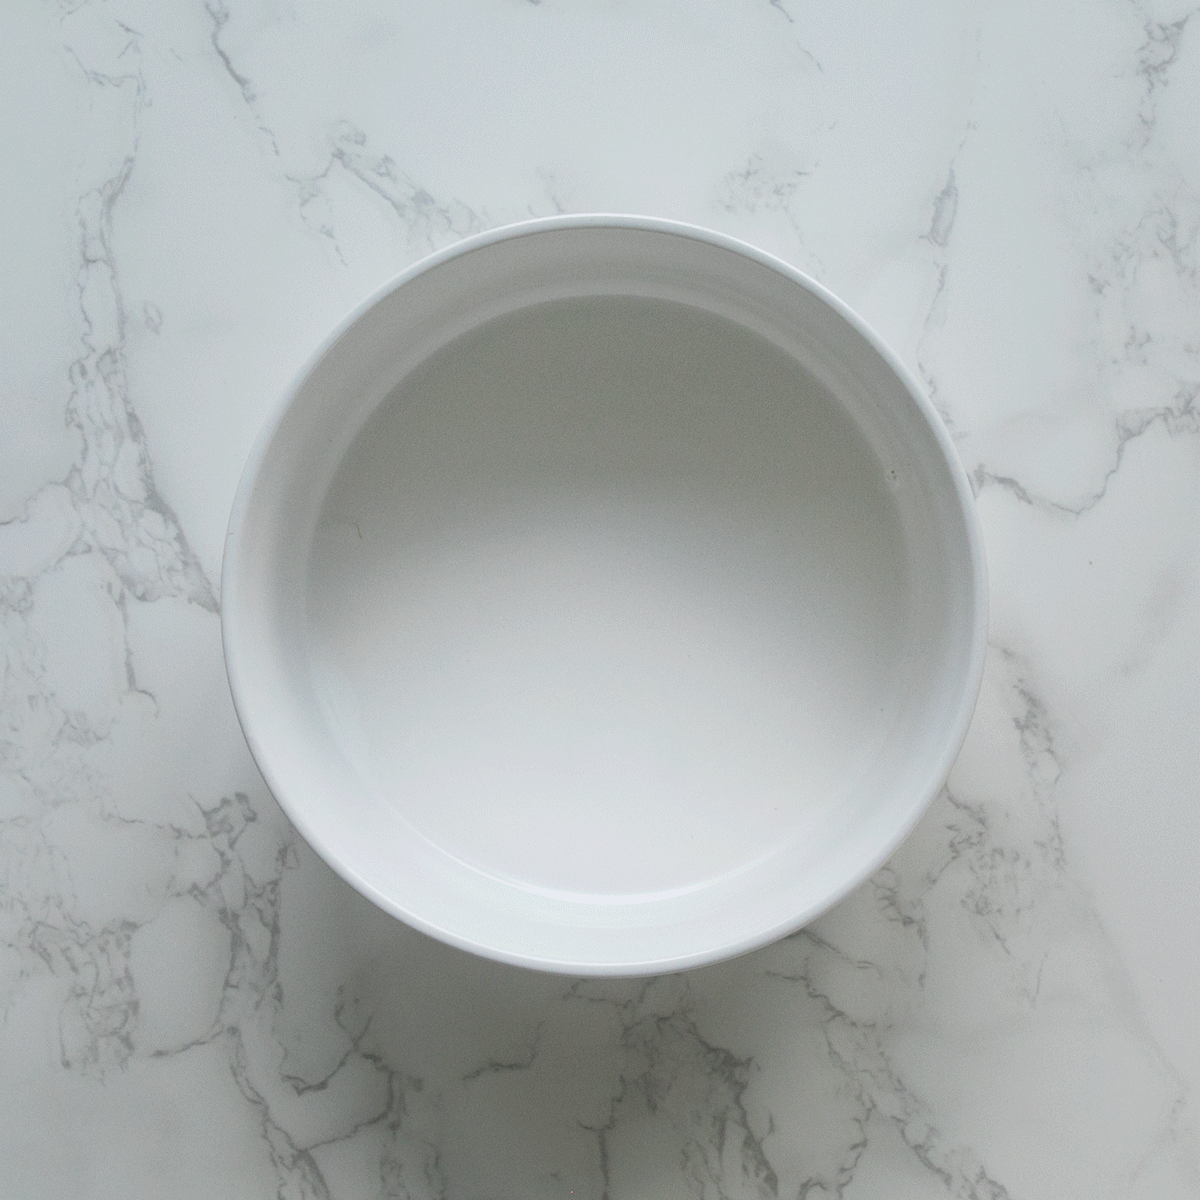 A white bowl on a marble surface, perfect for serving food containing One serving of BLUE Life Protection Formula Lamb and Brown Rice Recipe with chopped Cucumbers, Peas, Spinach, Carrots,Radishes.